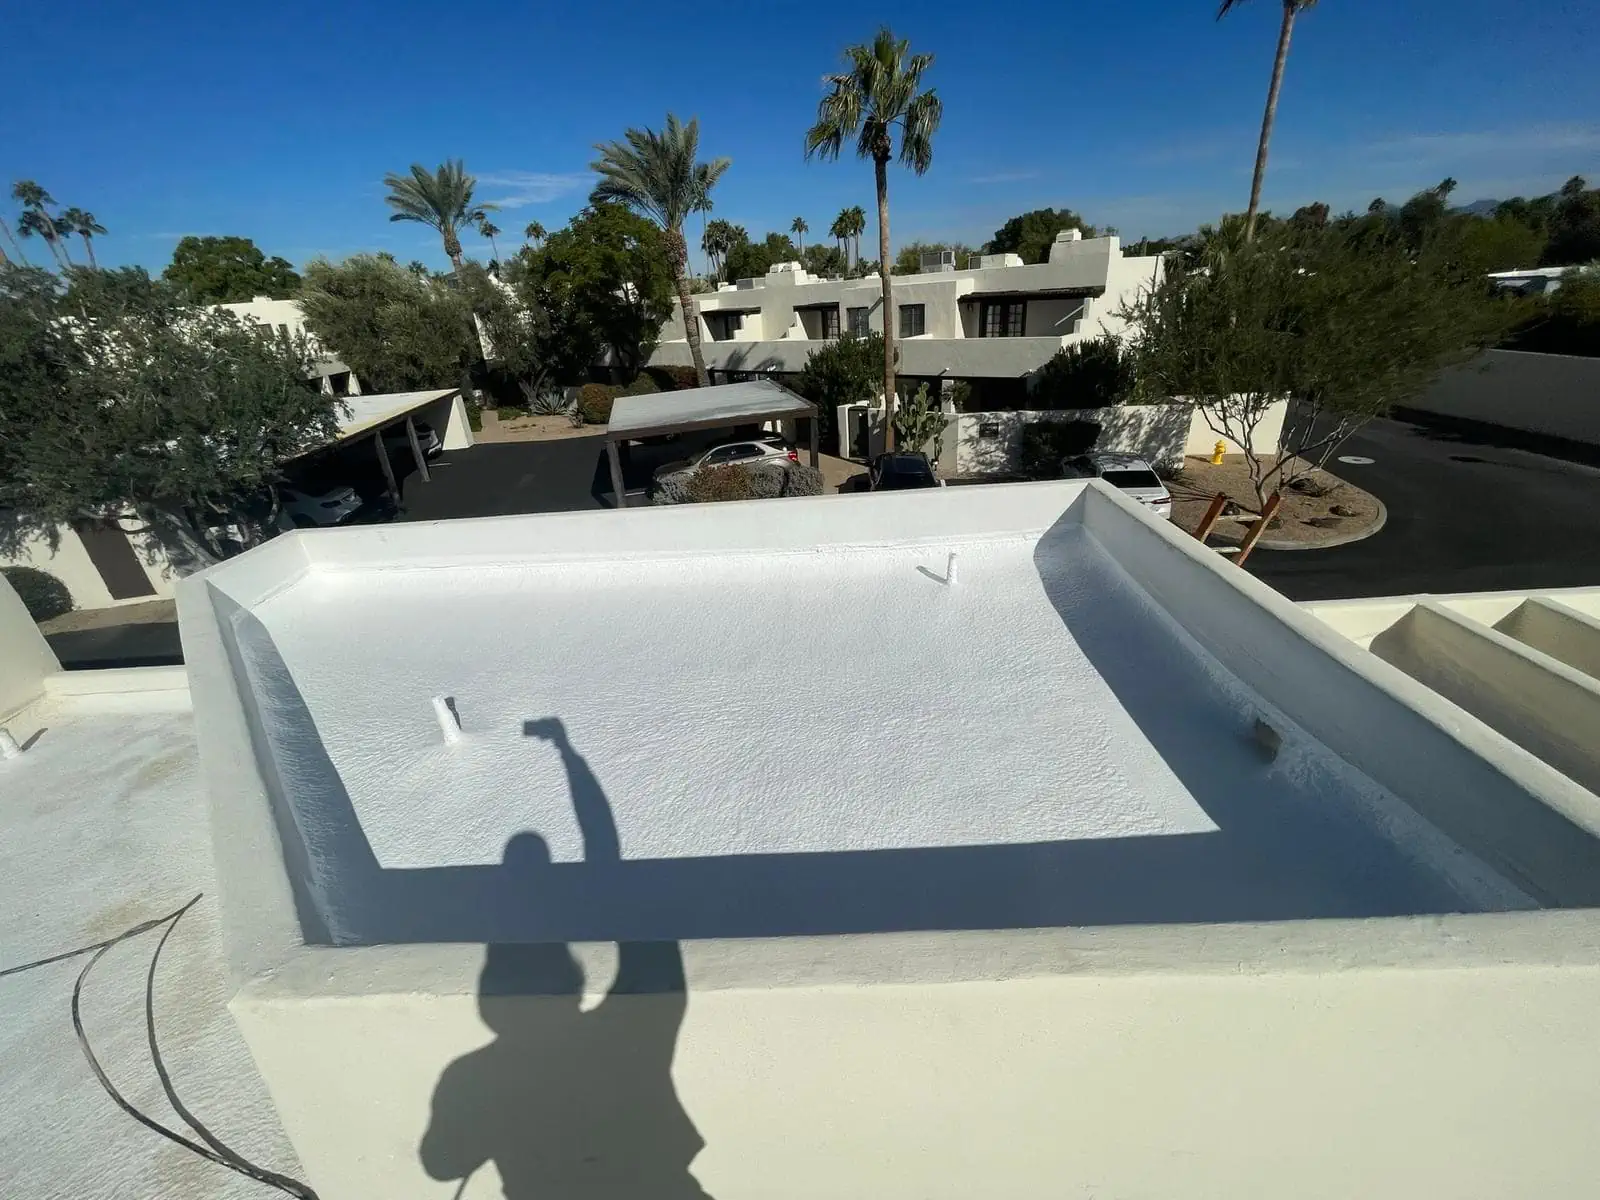 foam roof completed by local roof contractor in az